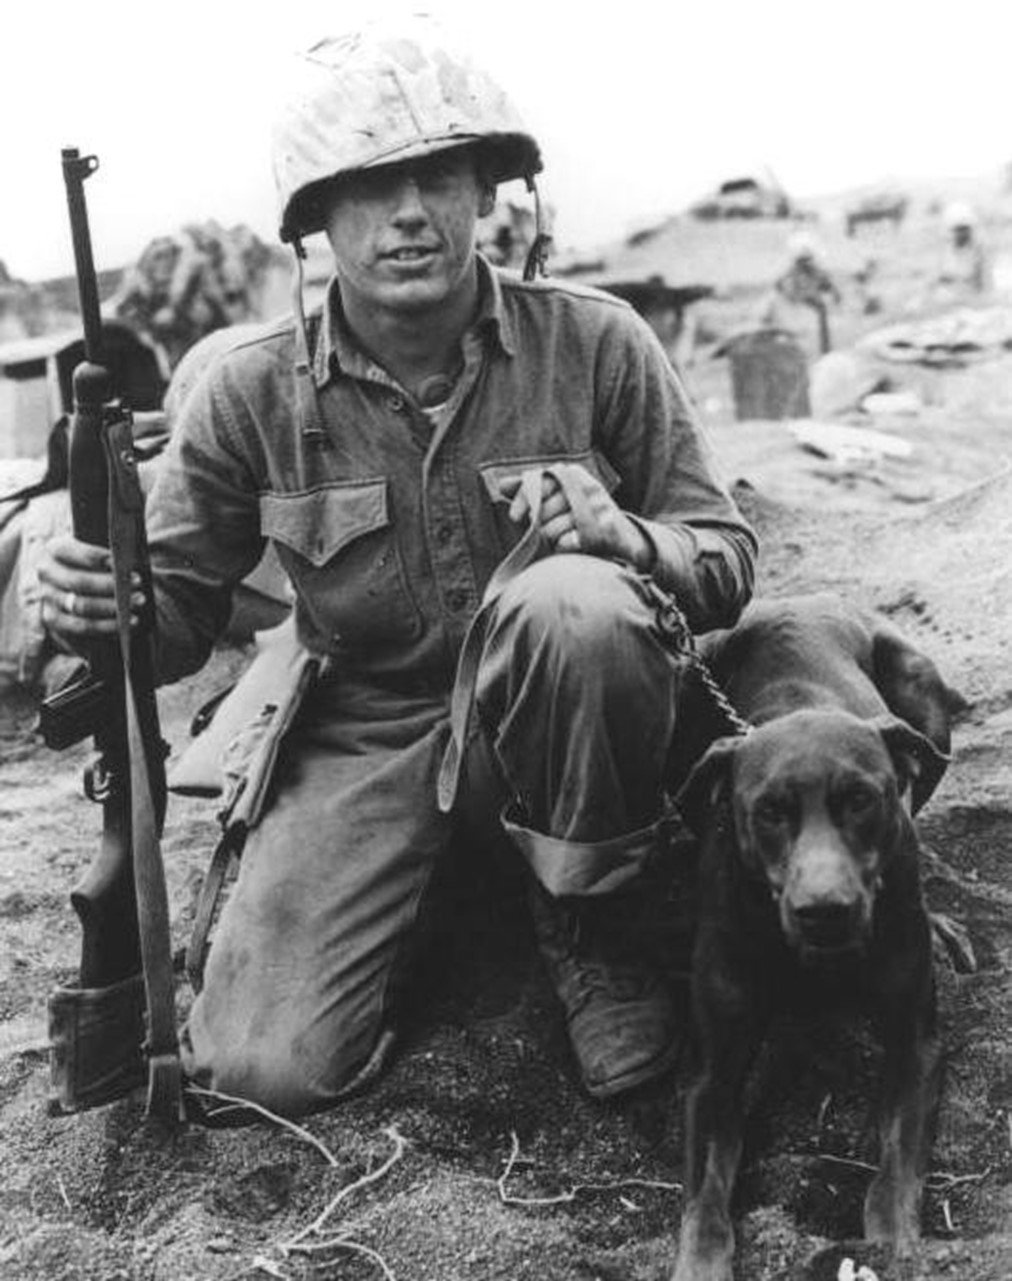  Grinning, U.S. Marine Private Francis Hall, stationed in Iwo Jima, poses with his Doberman dog. 